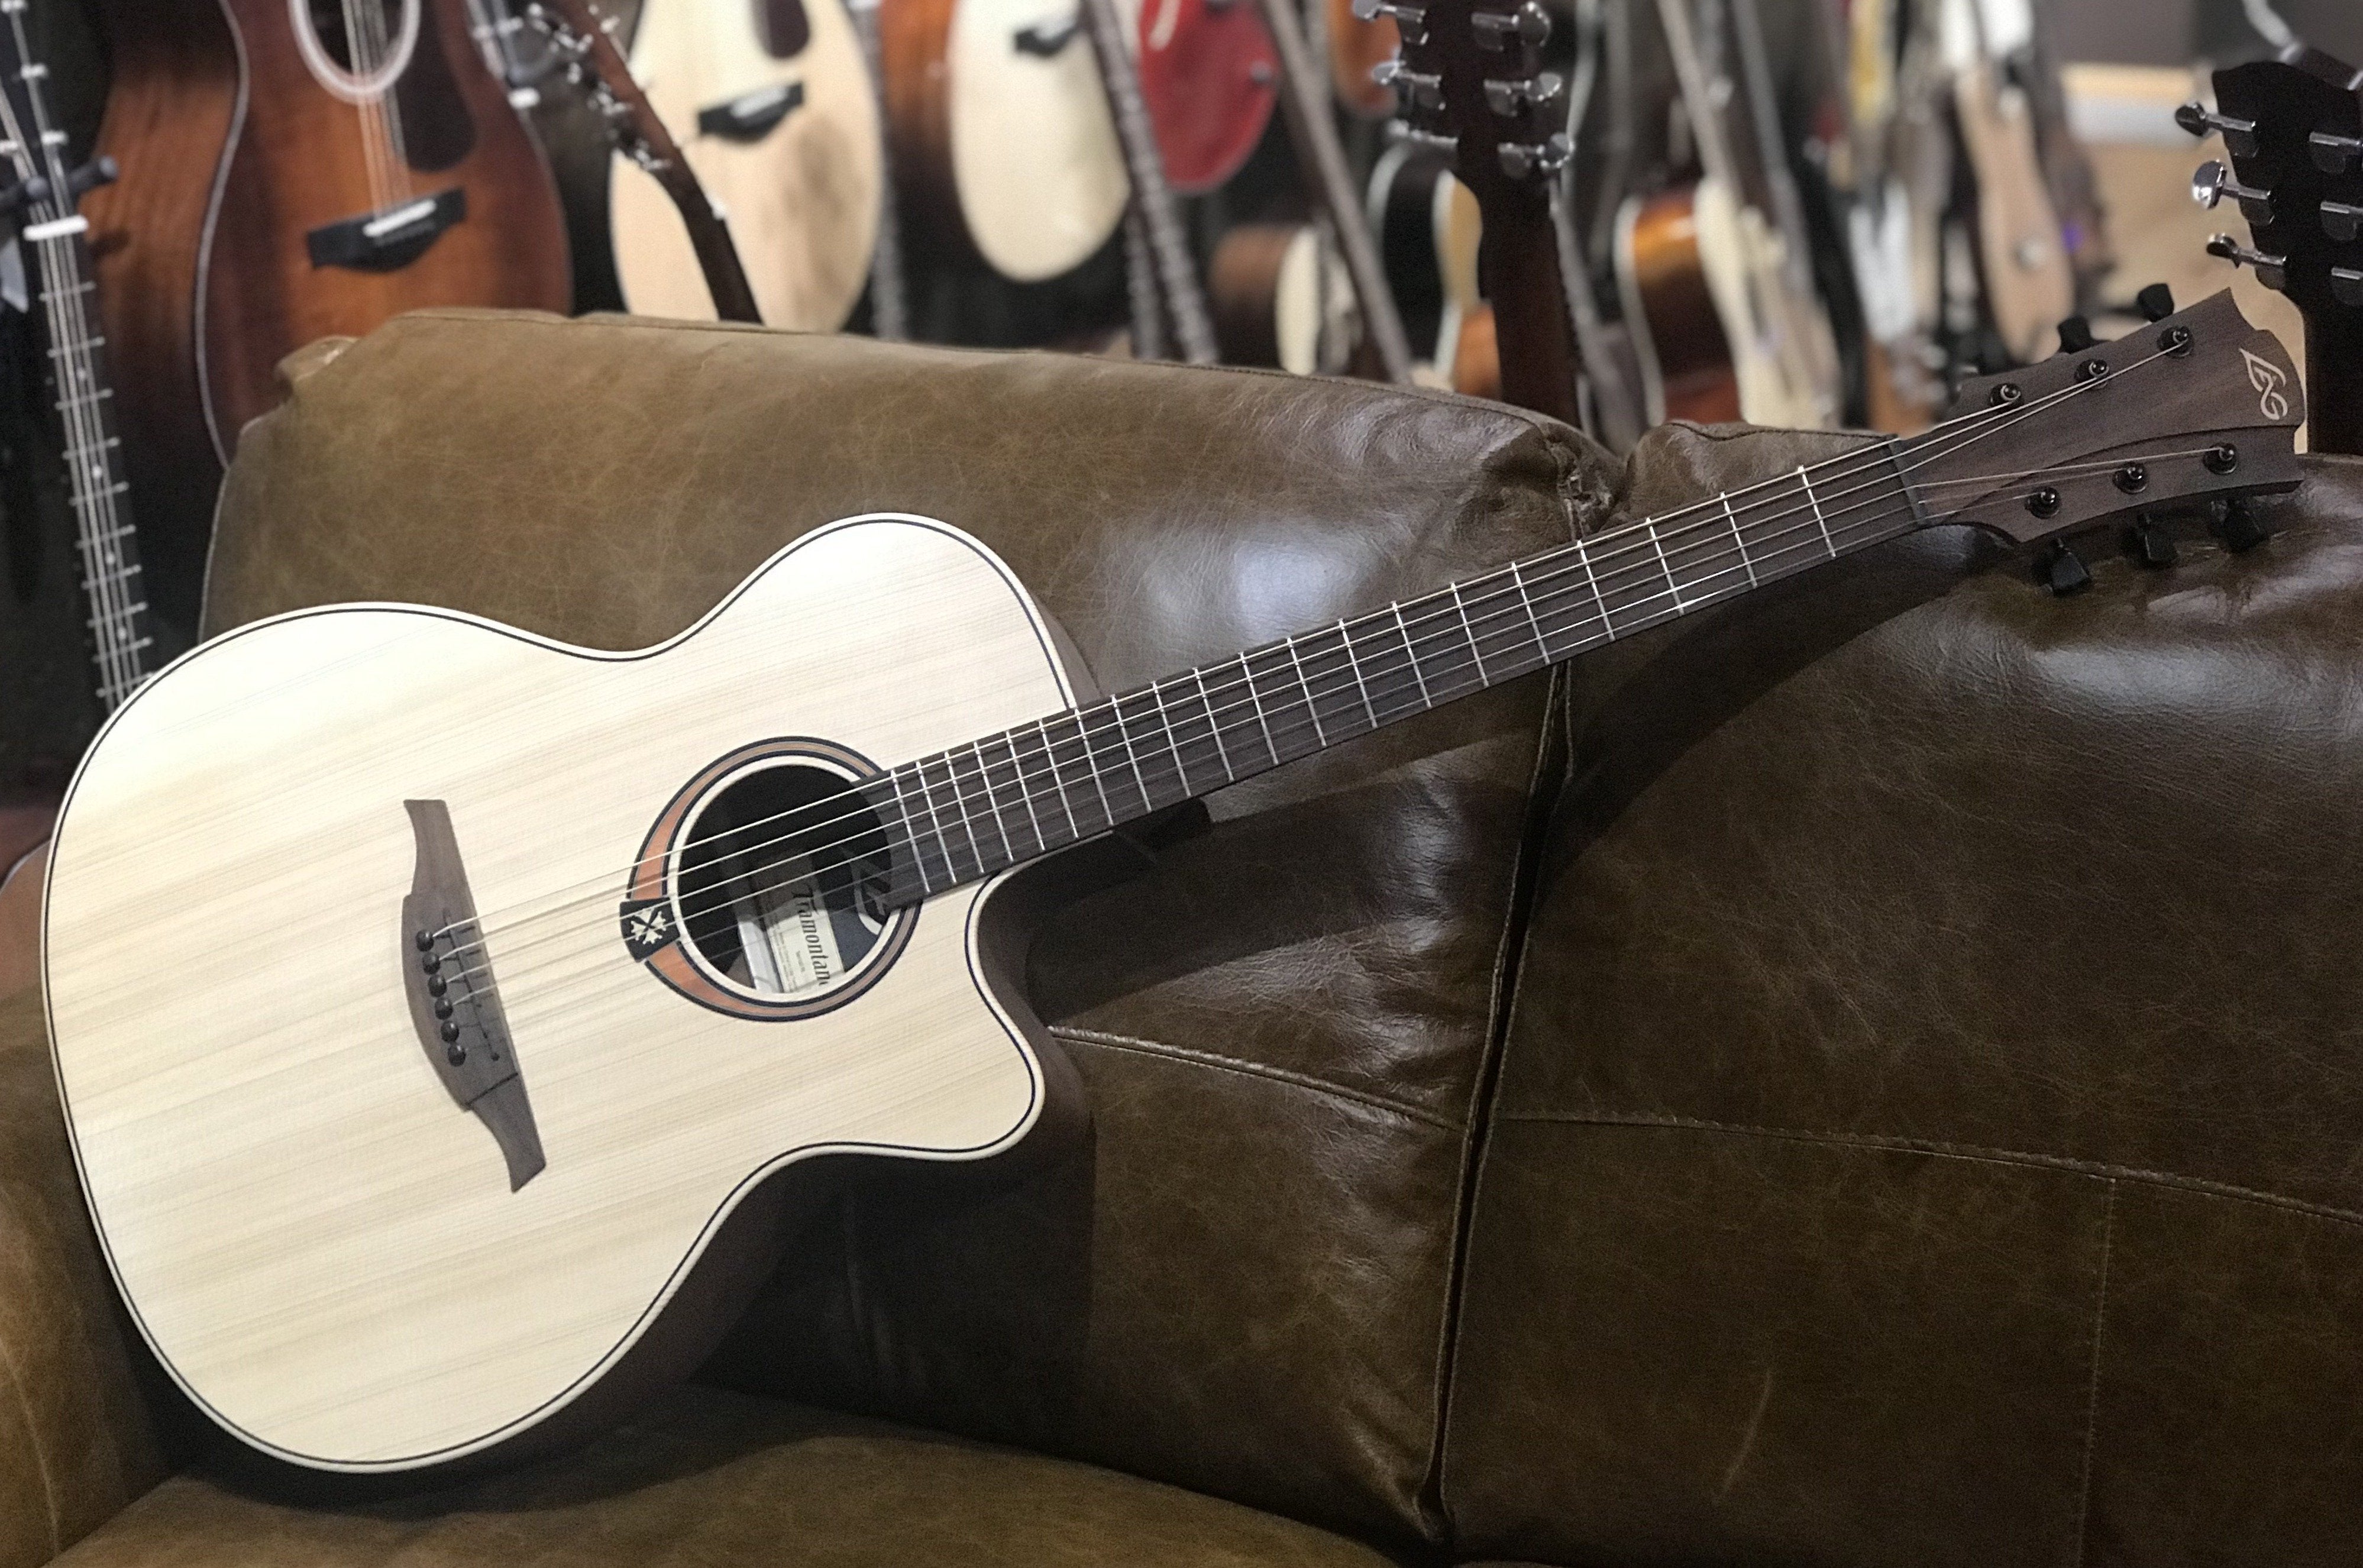 LAG TRAMONTANE 70 T70ACE AUDITORIUM CUTAWAY ELECTRO, Electro Acoustic Guitar for sale at Richards Guitars.